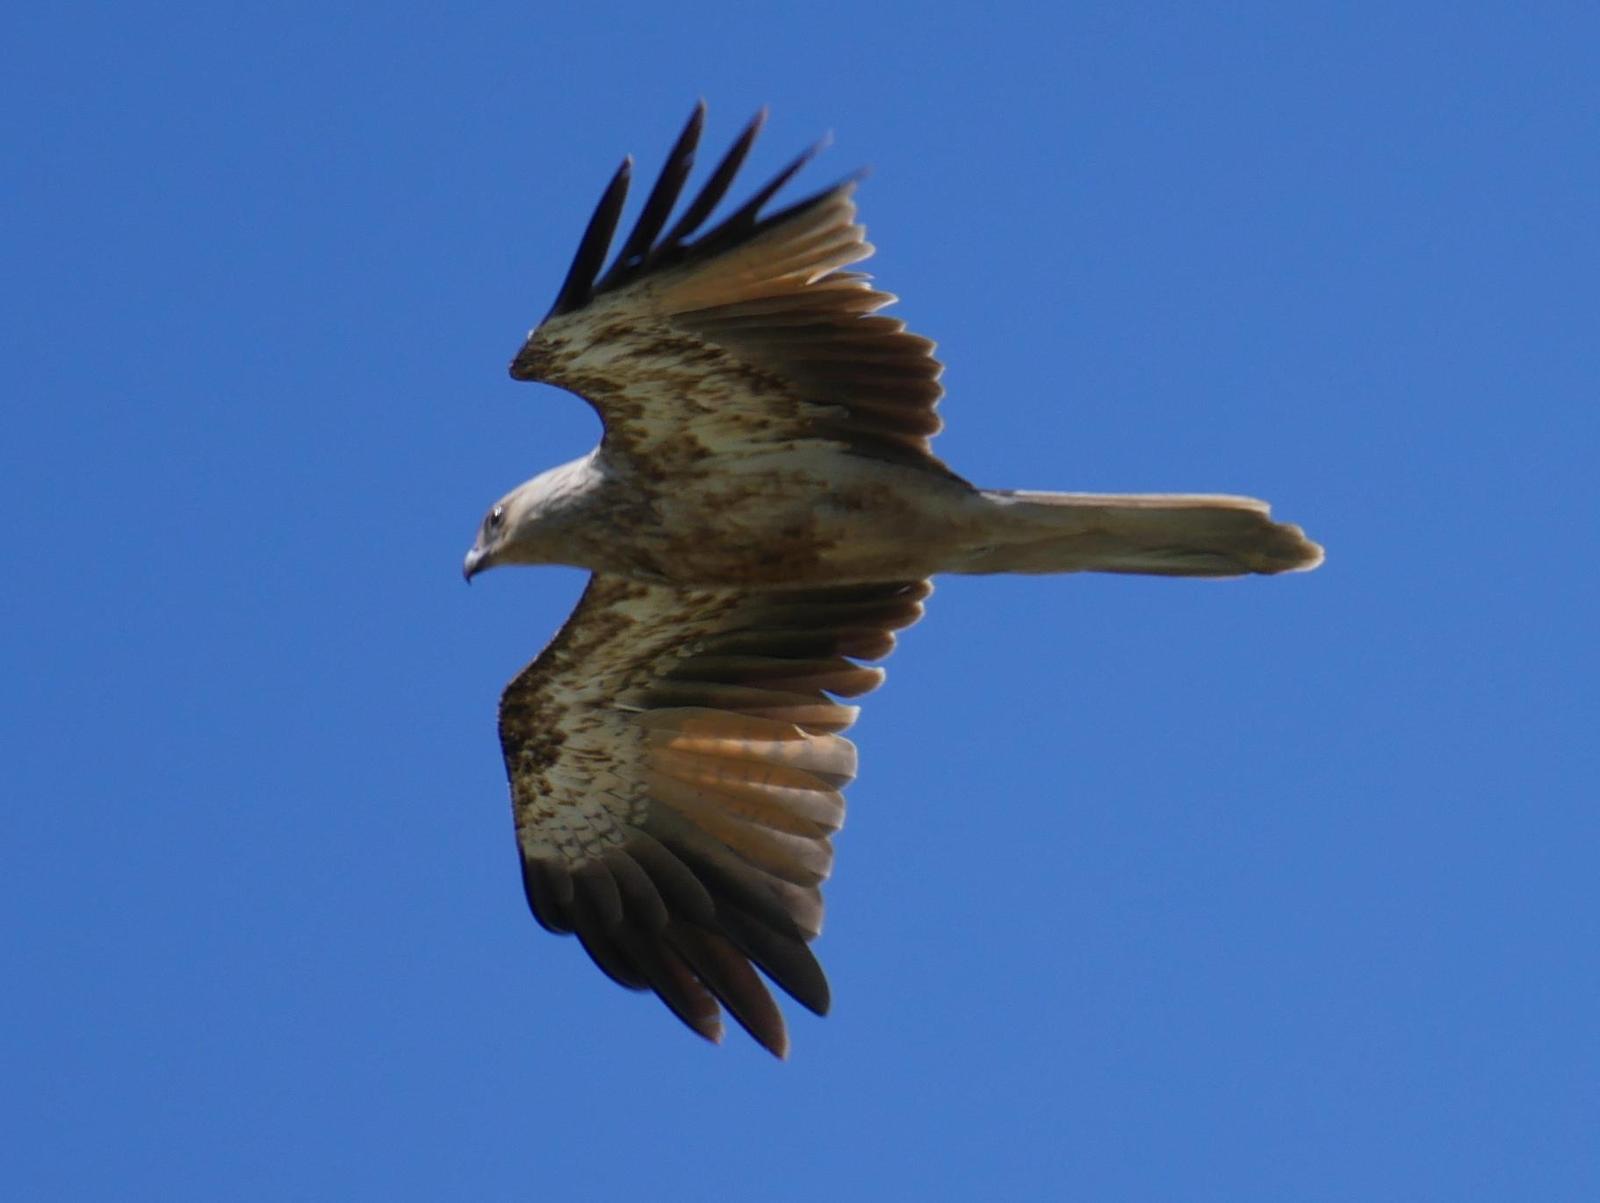 Whistling Kite Photo by Peter Lowe